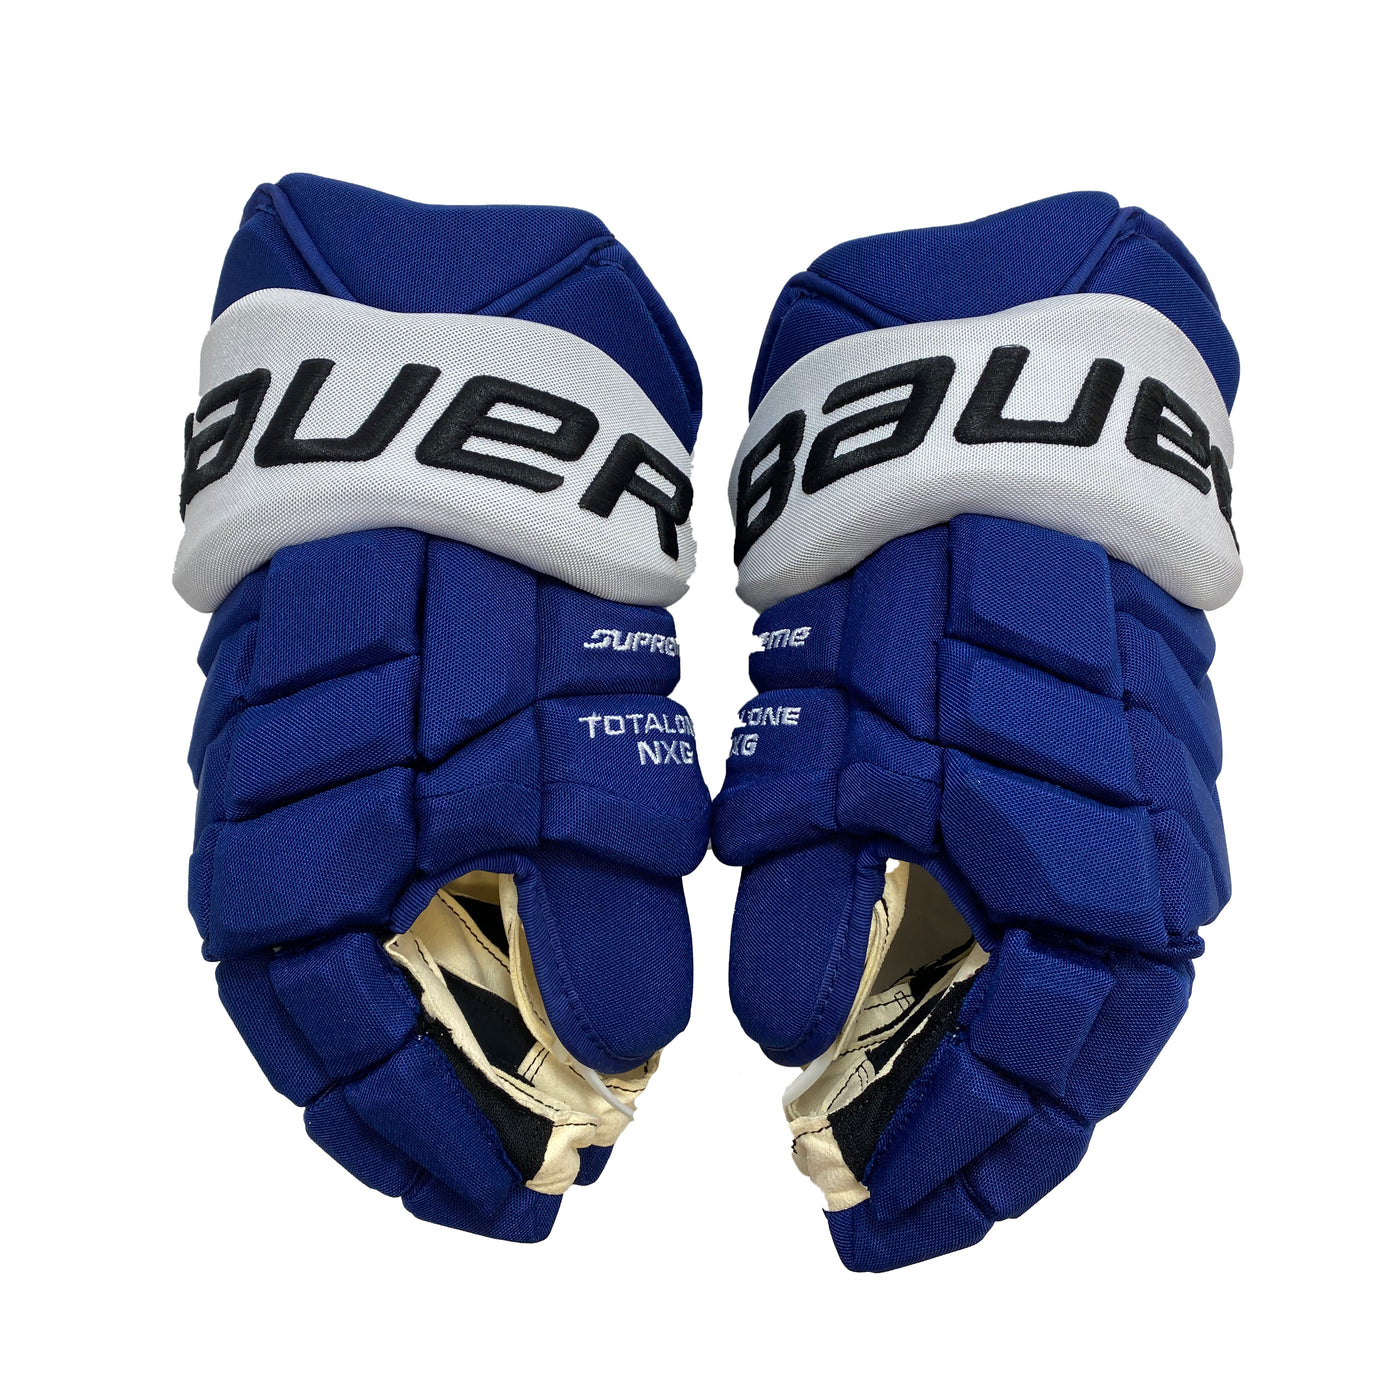 Bauer Supreme Total One NXG - Tampa Bay Lightning - Pro Stock Gloves - Team Issue